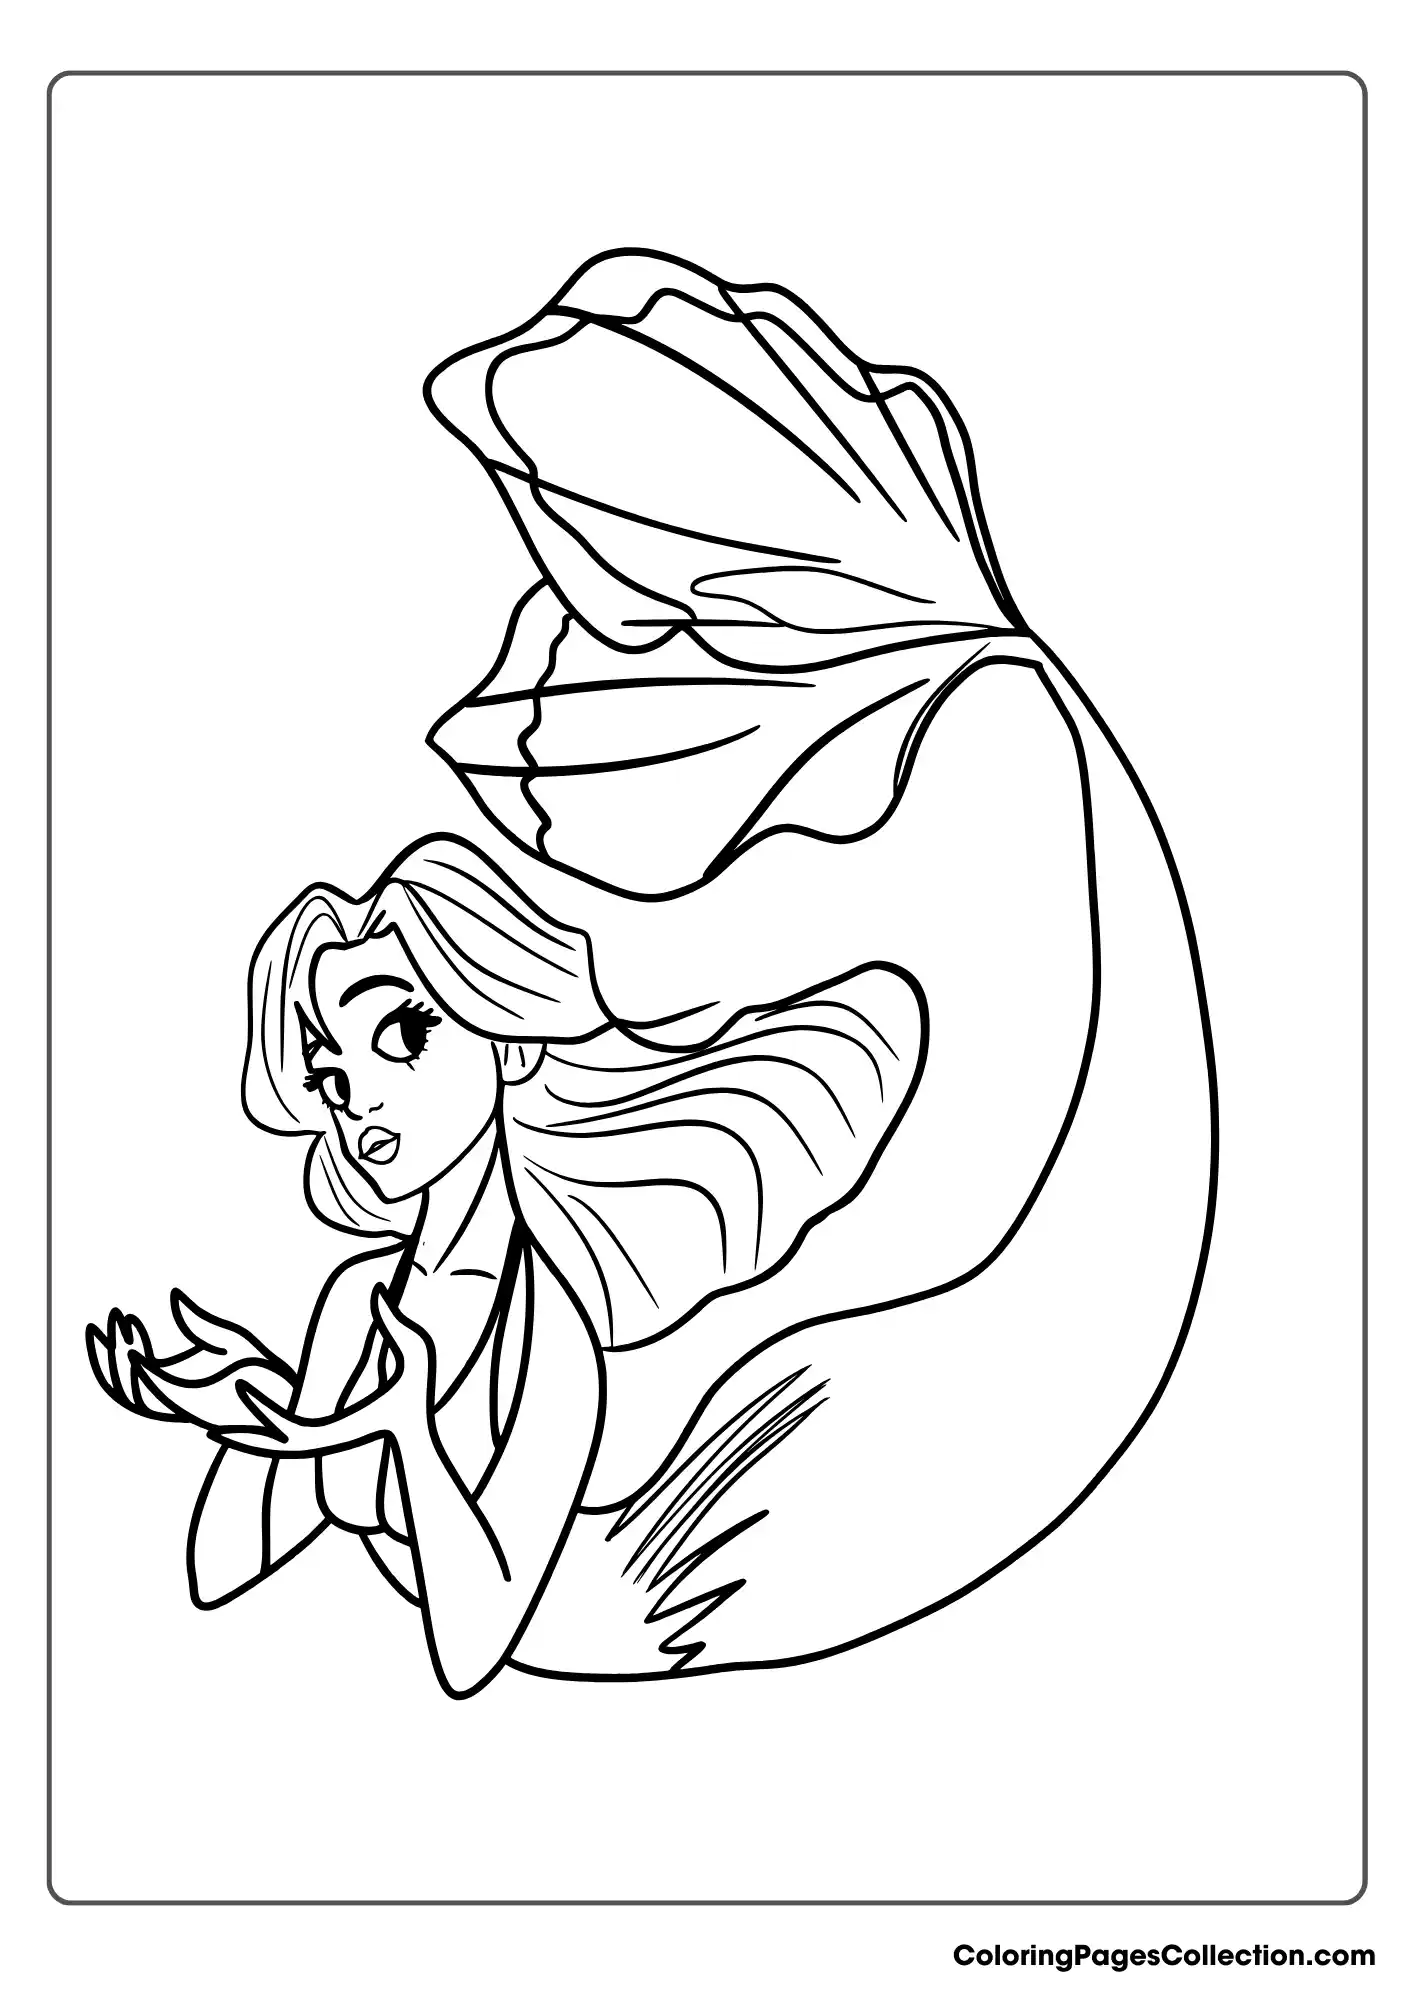 ocean coloring pages